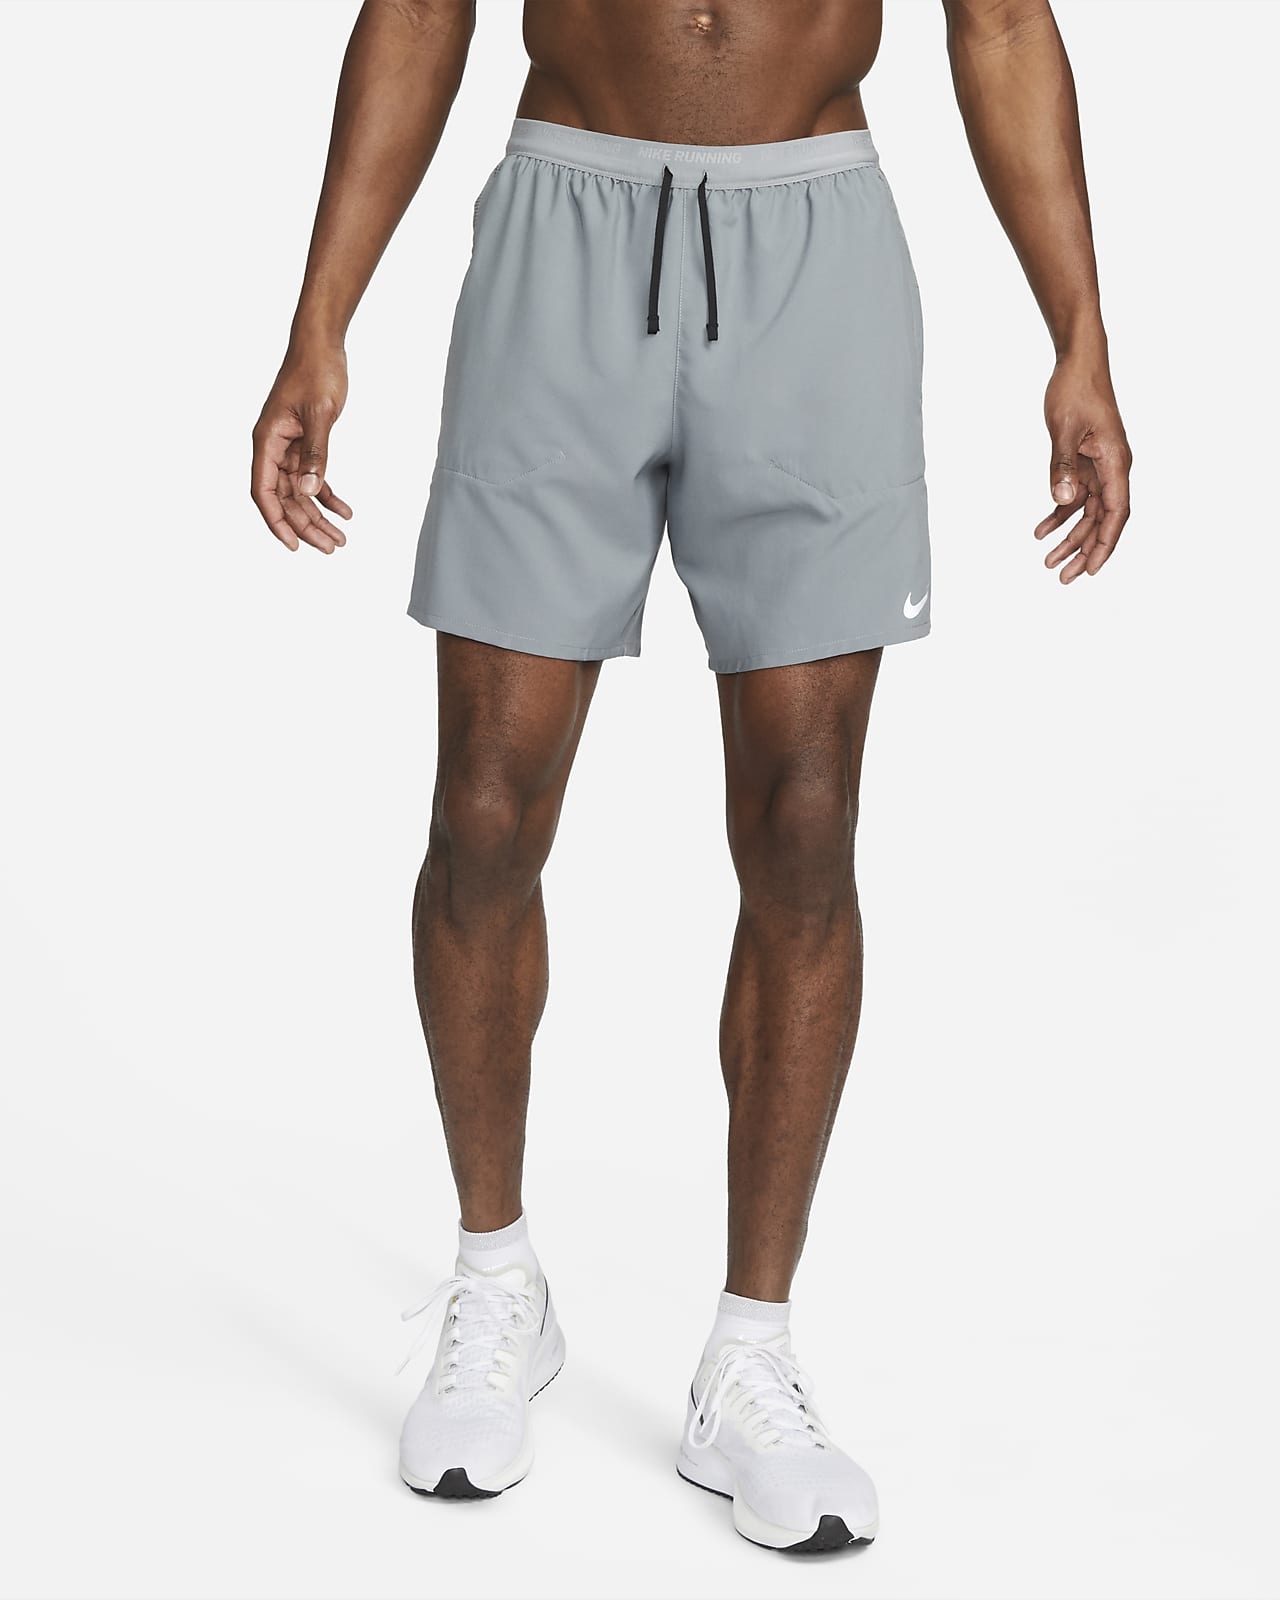 Nike Dri-FIT Stride Men's 18cm (approx.) 2-in-1 Running Shorts